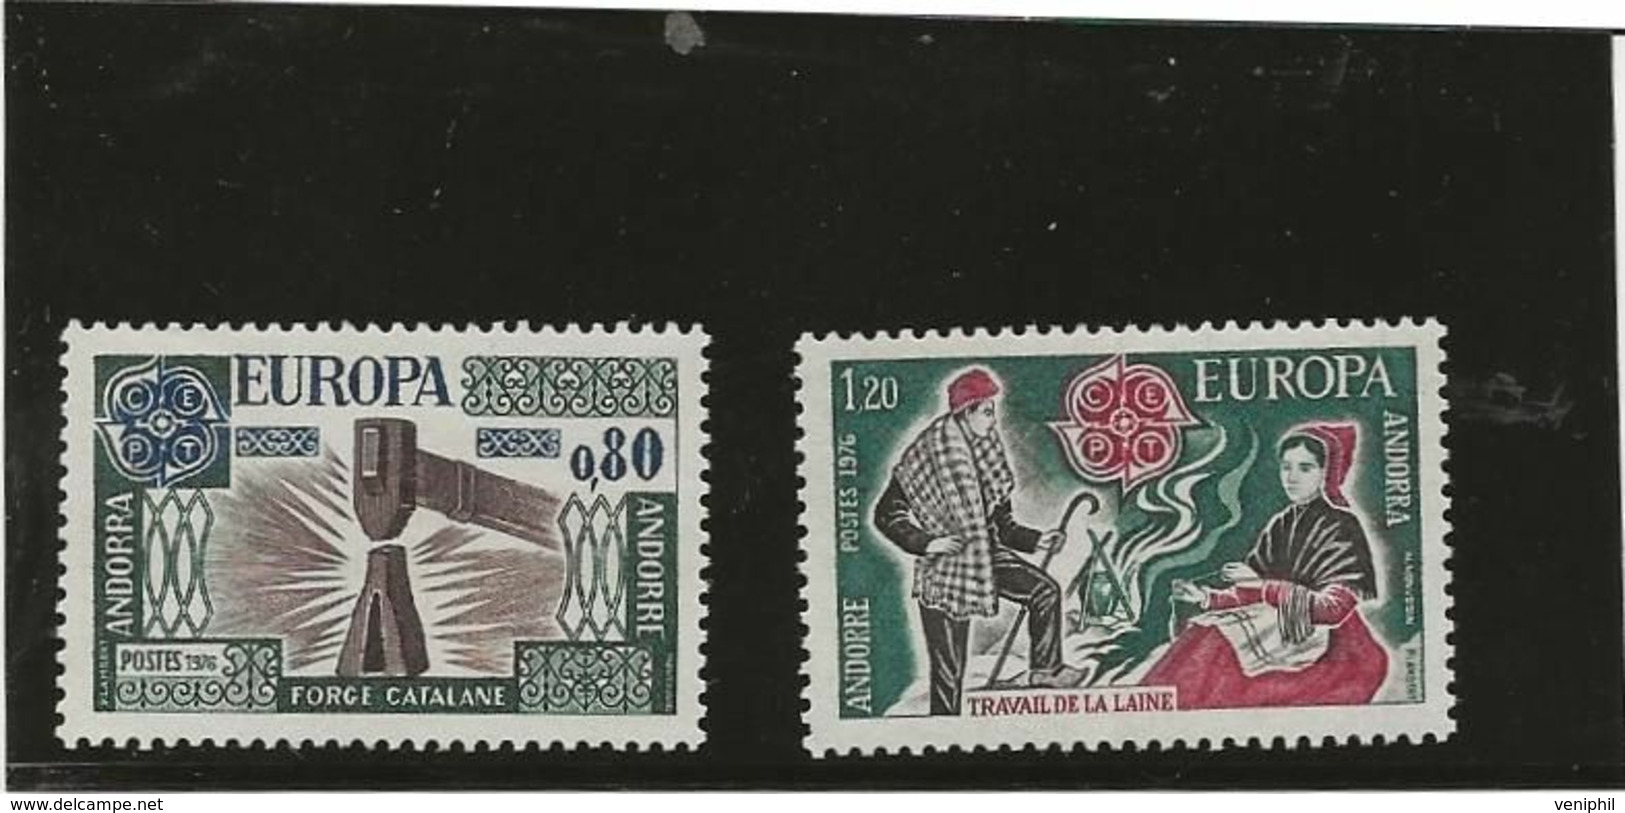 ANDORRE - TIMBRES EUROPA N° 253 Et 254 NEUF SANS CHARNIERE -ANNEE 1976 - COTE : 14,00 € € - Nuevos